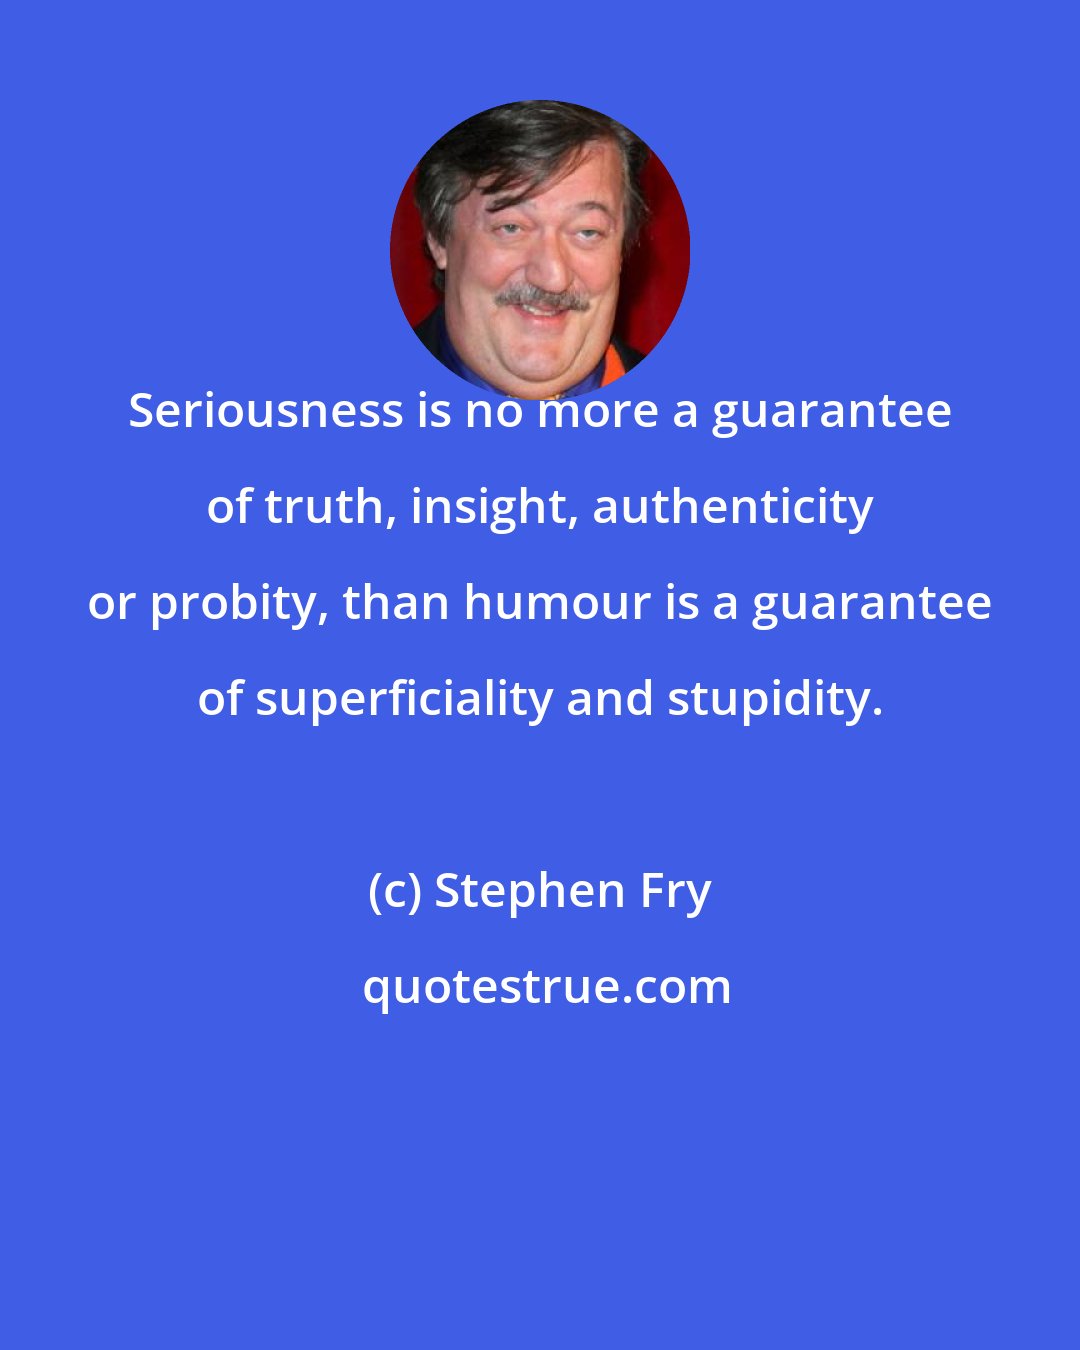 Stephen Fry: Seriousness is no more a guarantee of truth, insight, authenticity or probity, than humour is a guarantee of superficiality and stupidity.